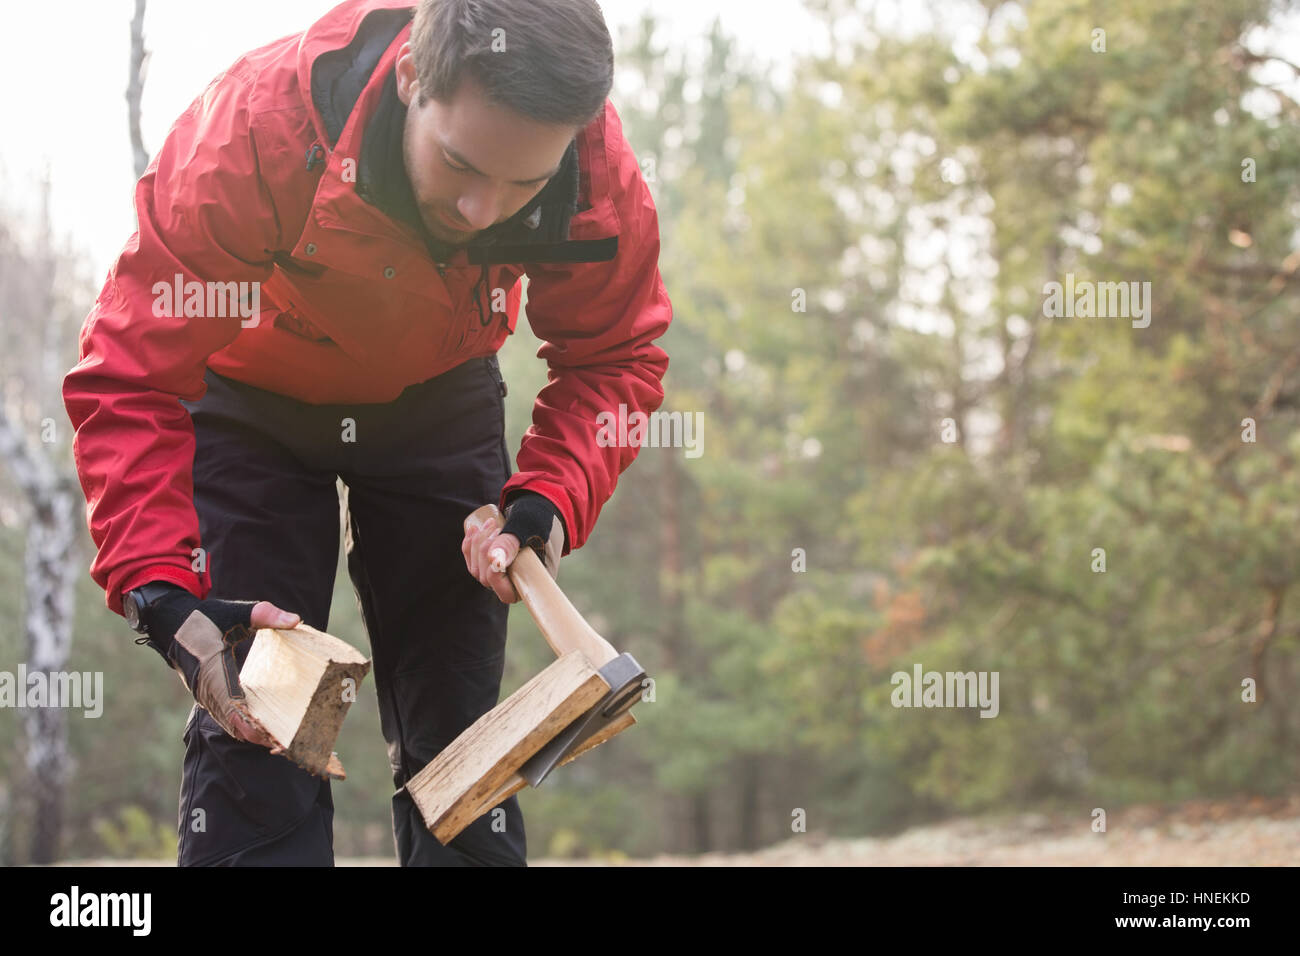 Male hiker cutting firewood in forest Stock Photo